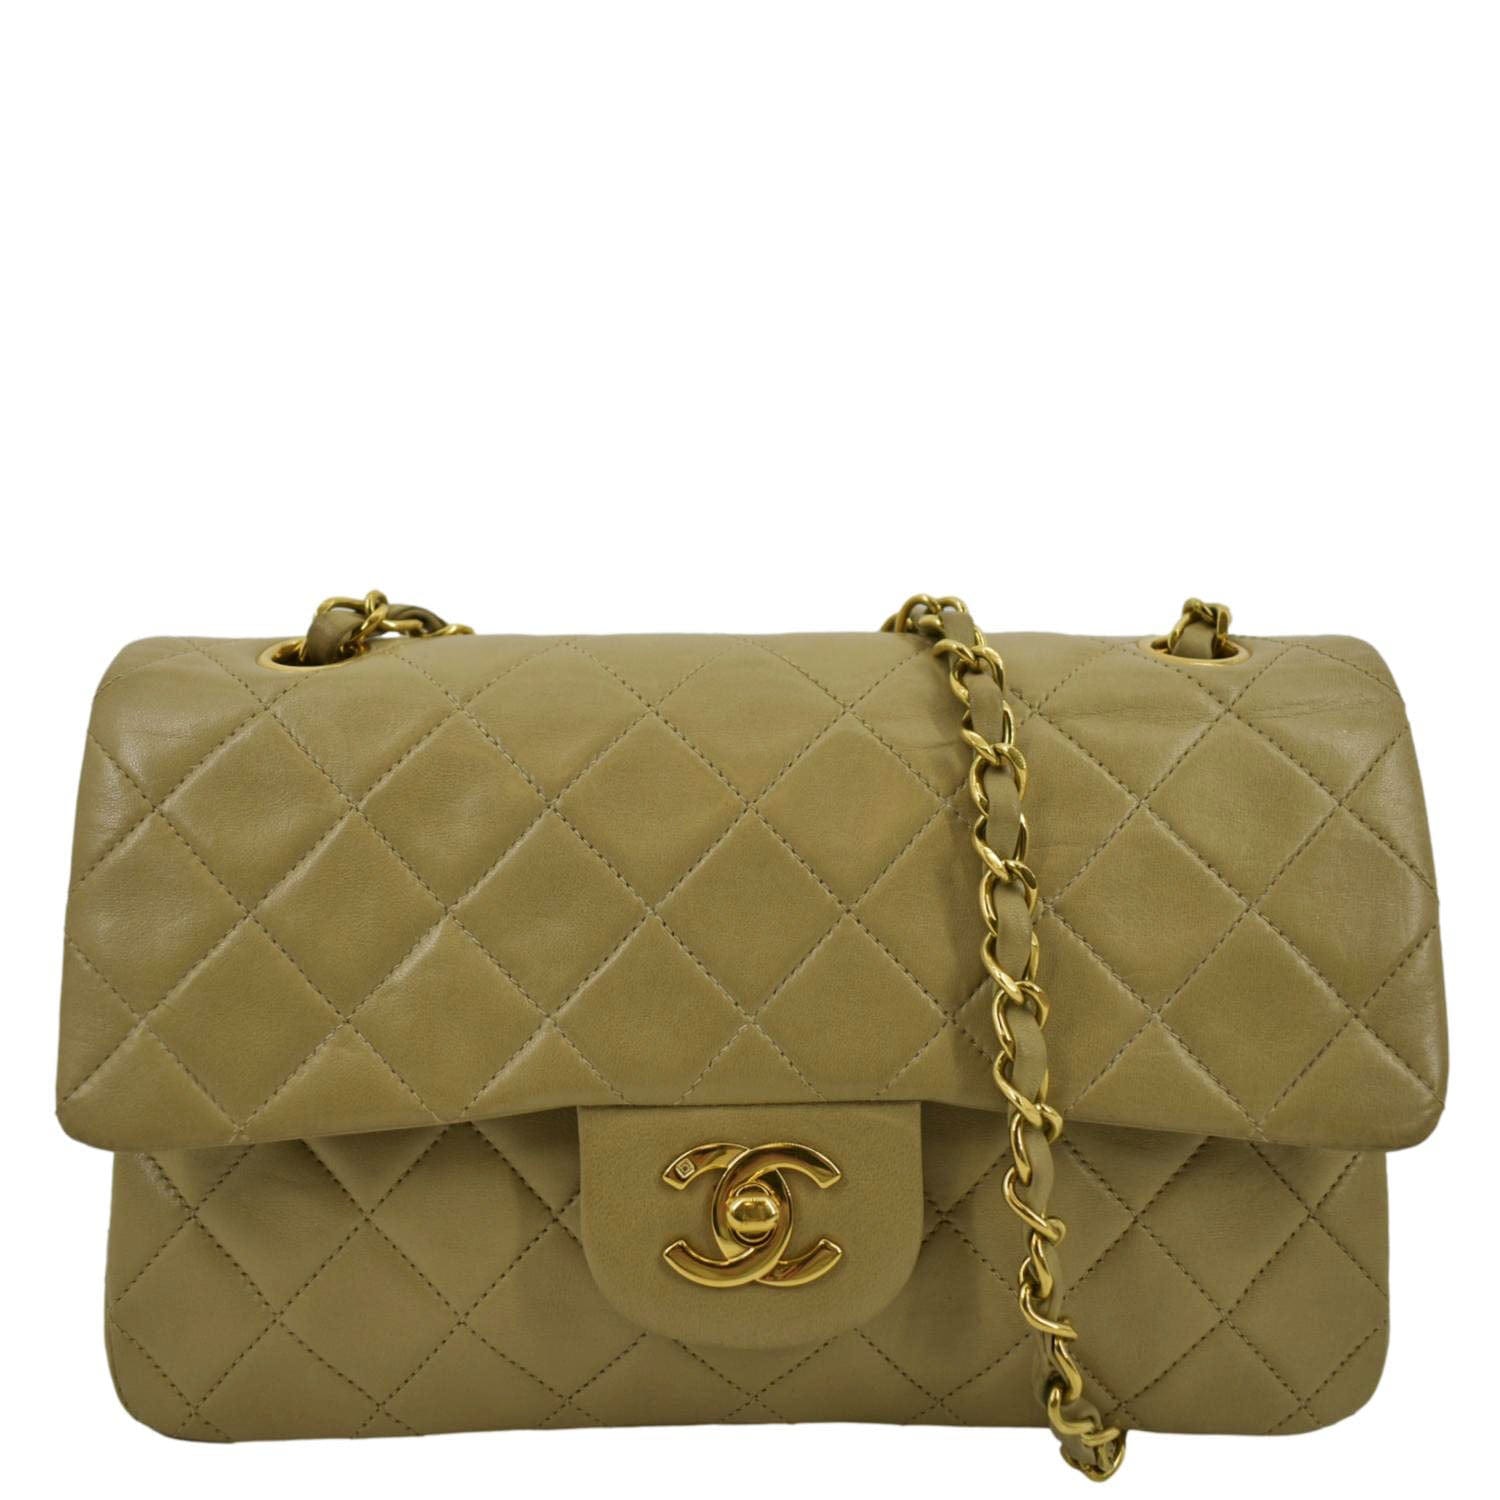 Chanel Green Leather Medium Classic Double Flap Shoulder Bag Chanel